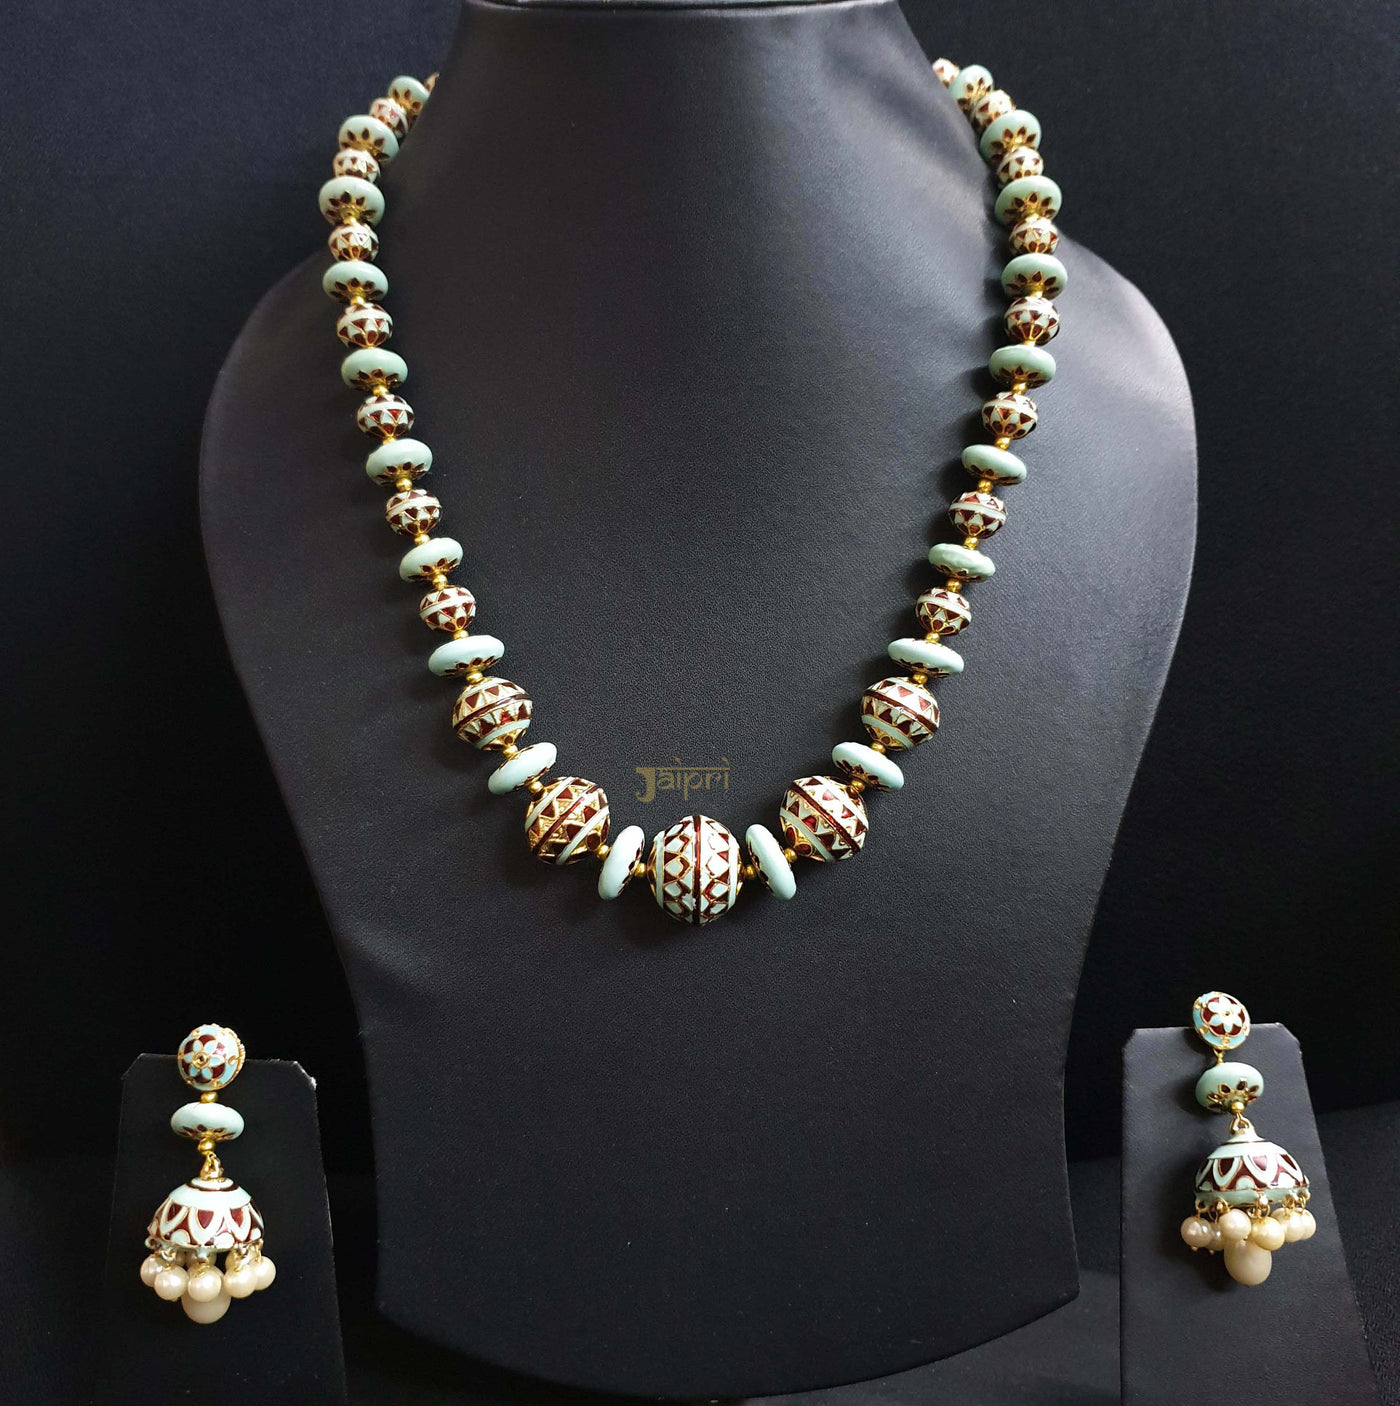 Turquoise Meenakari Beads Necklace With Earrings